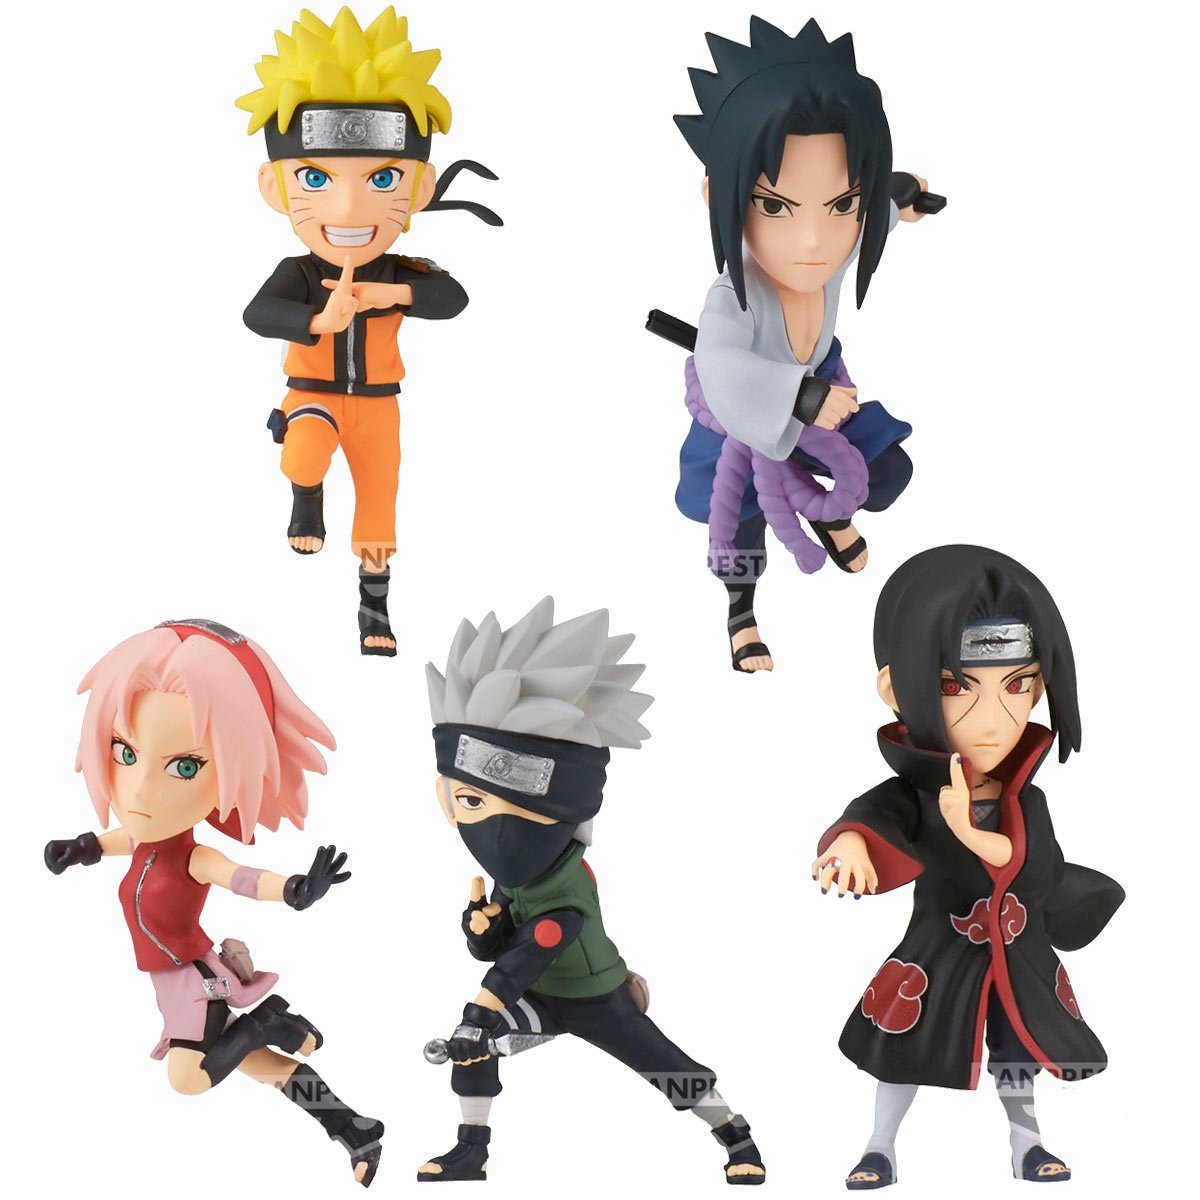 Naruto Shippuden World Collectable Mini-Figure Case of 12 features